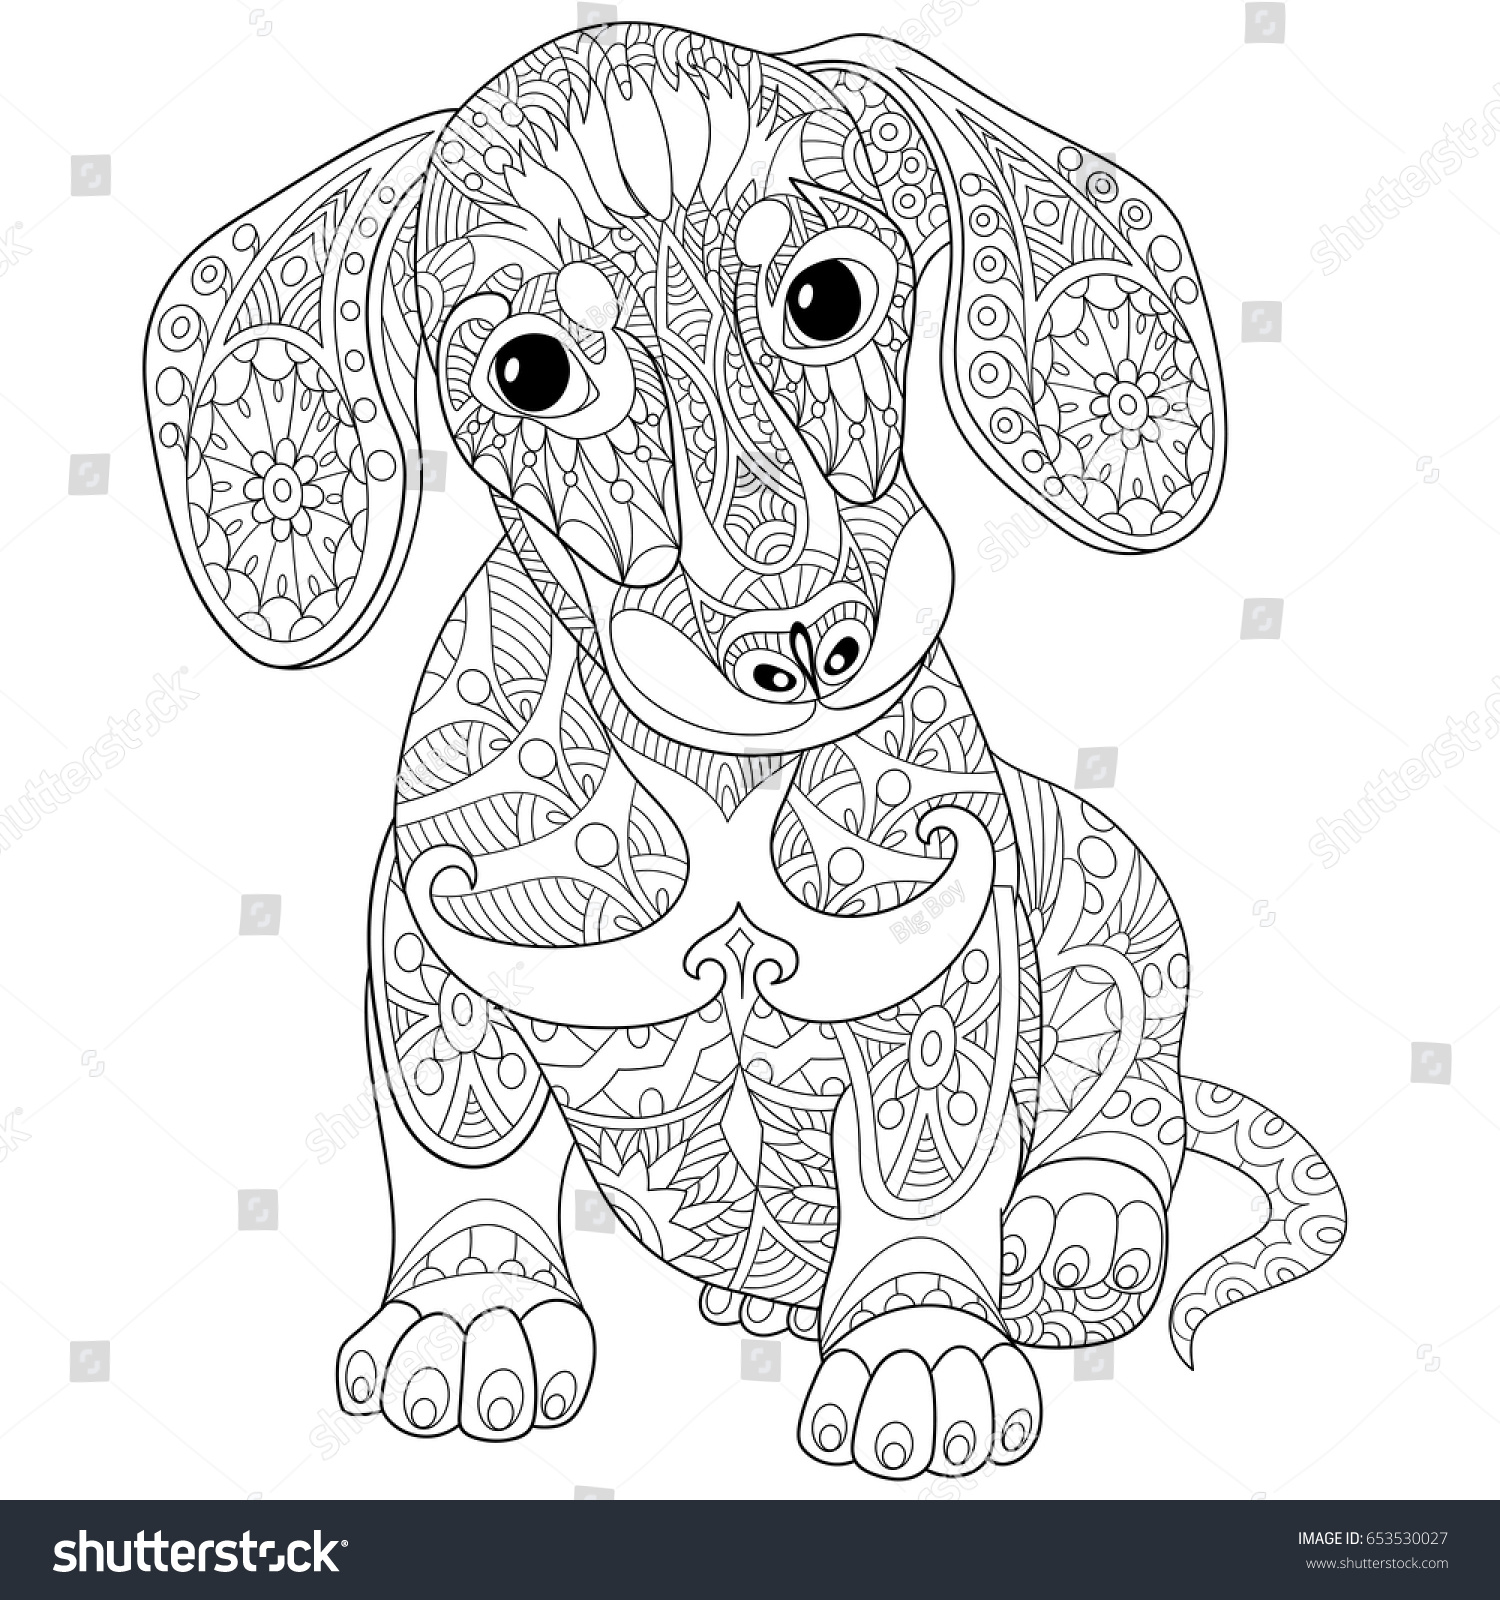 Coloring page of dachshund puppy dog symbol of 2018 Chinese New Year Freehand sketch